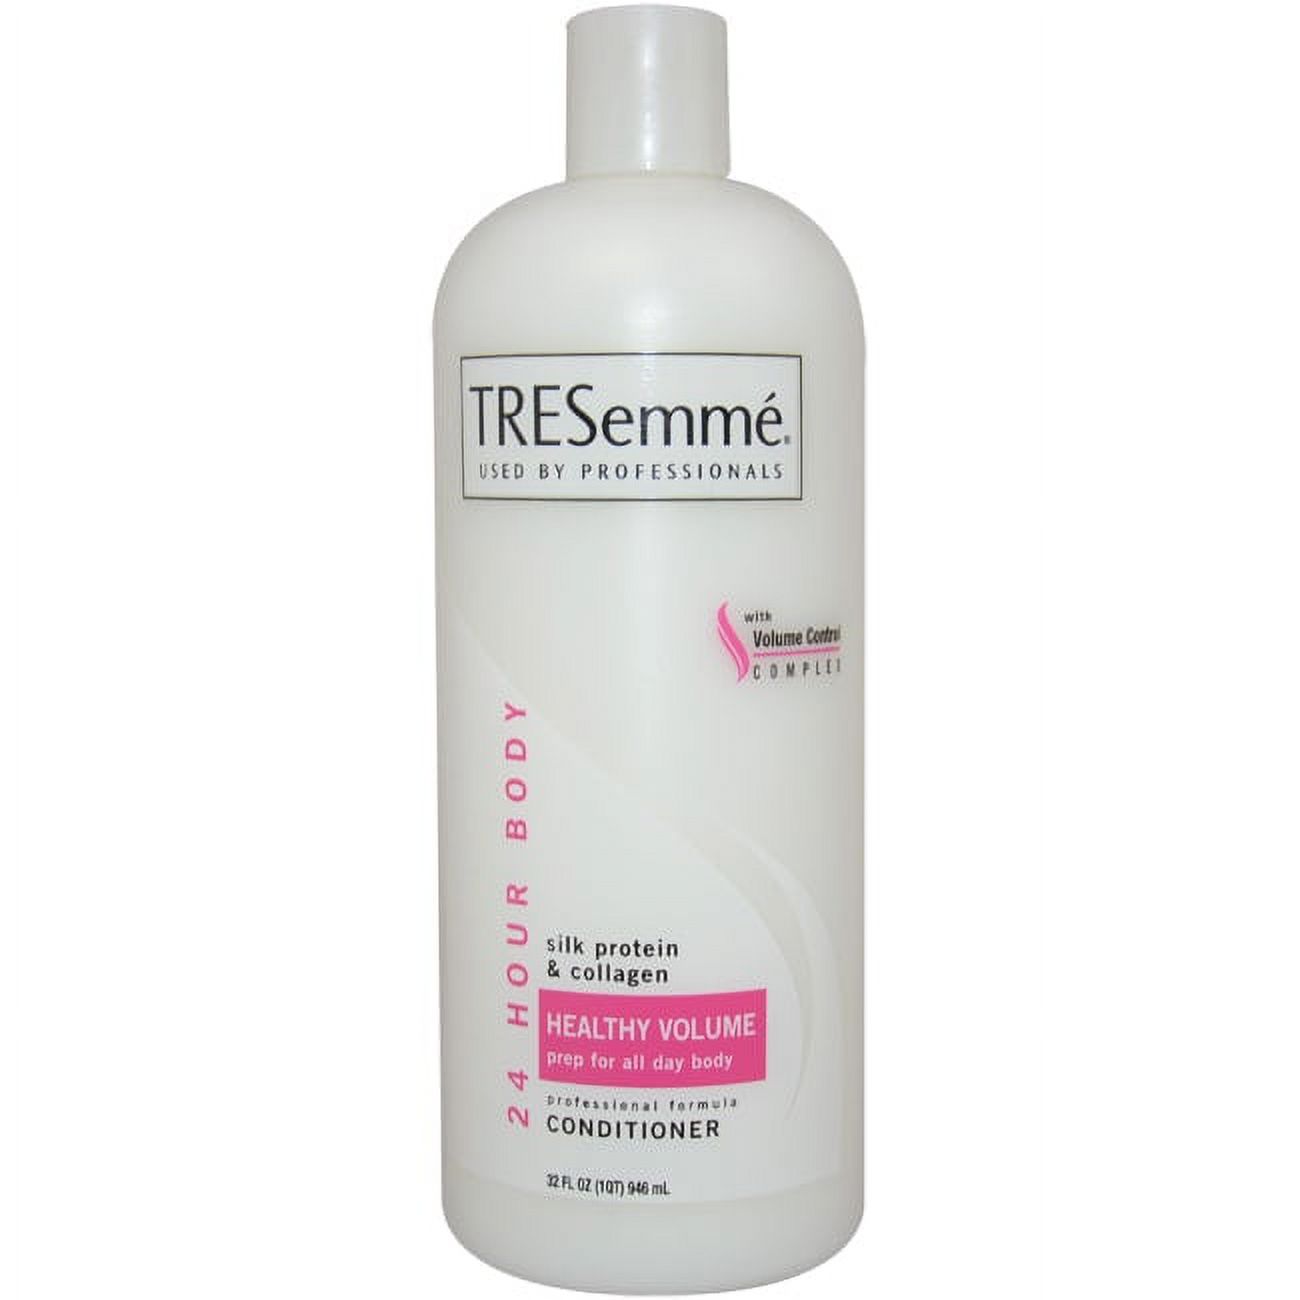 Tresemme 24 Hour Healthy Volume Conditioner, 32 fl oz - image 2 of 2